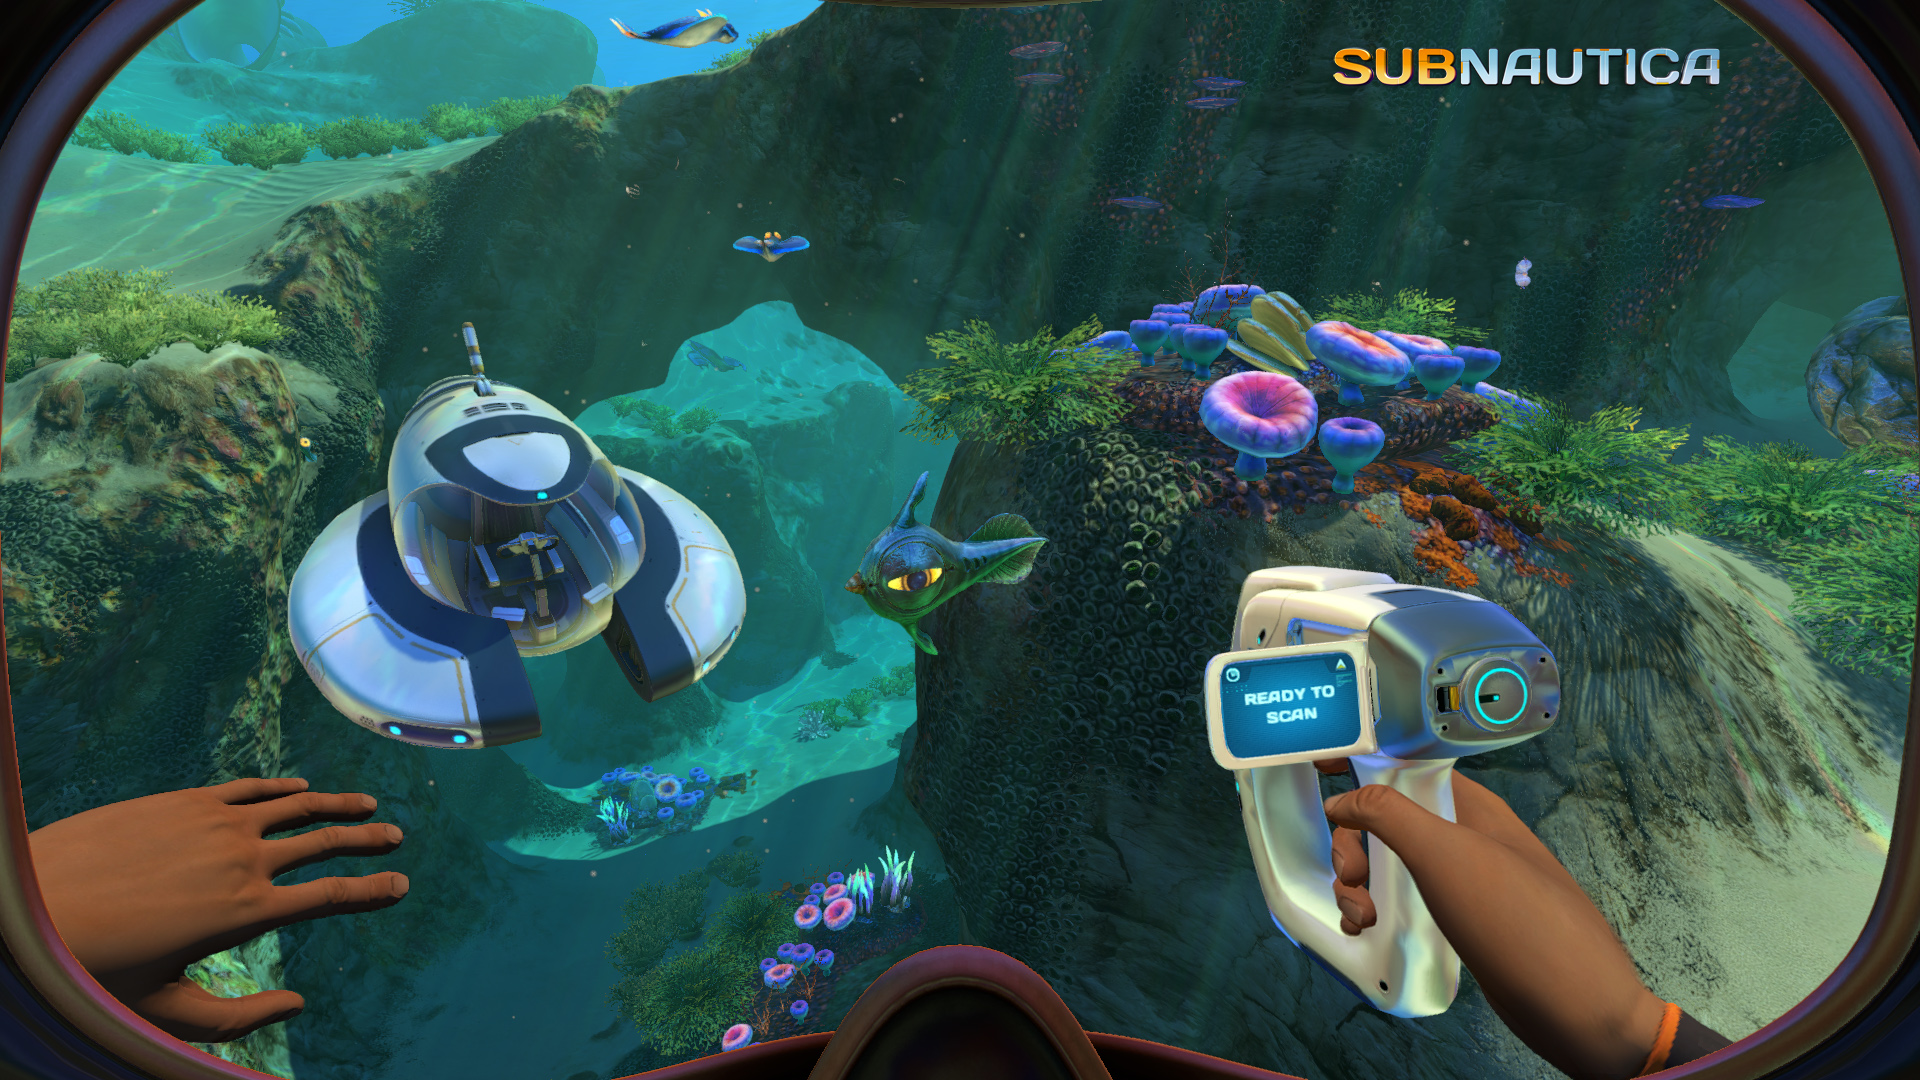 How to play Subnautica